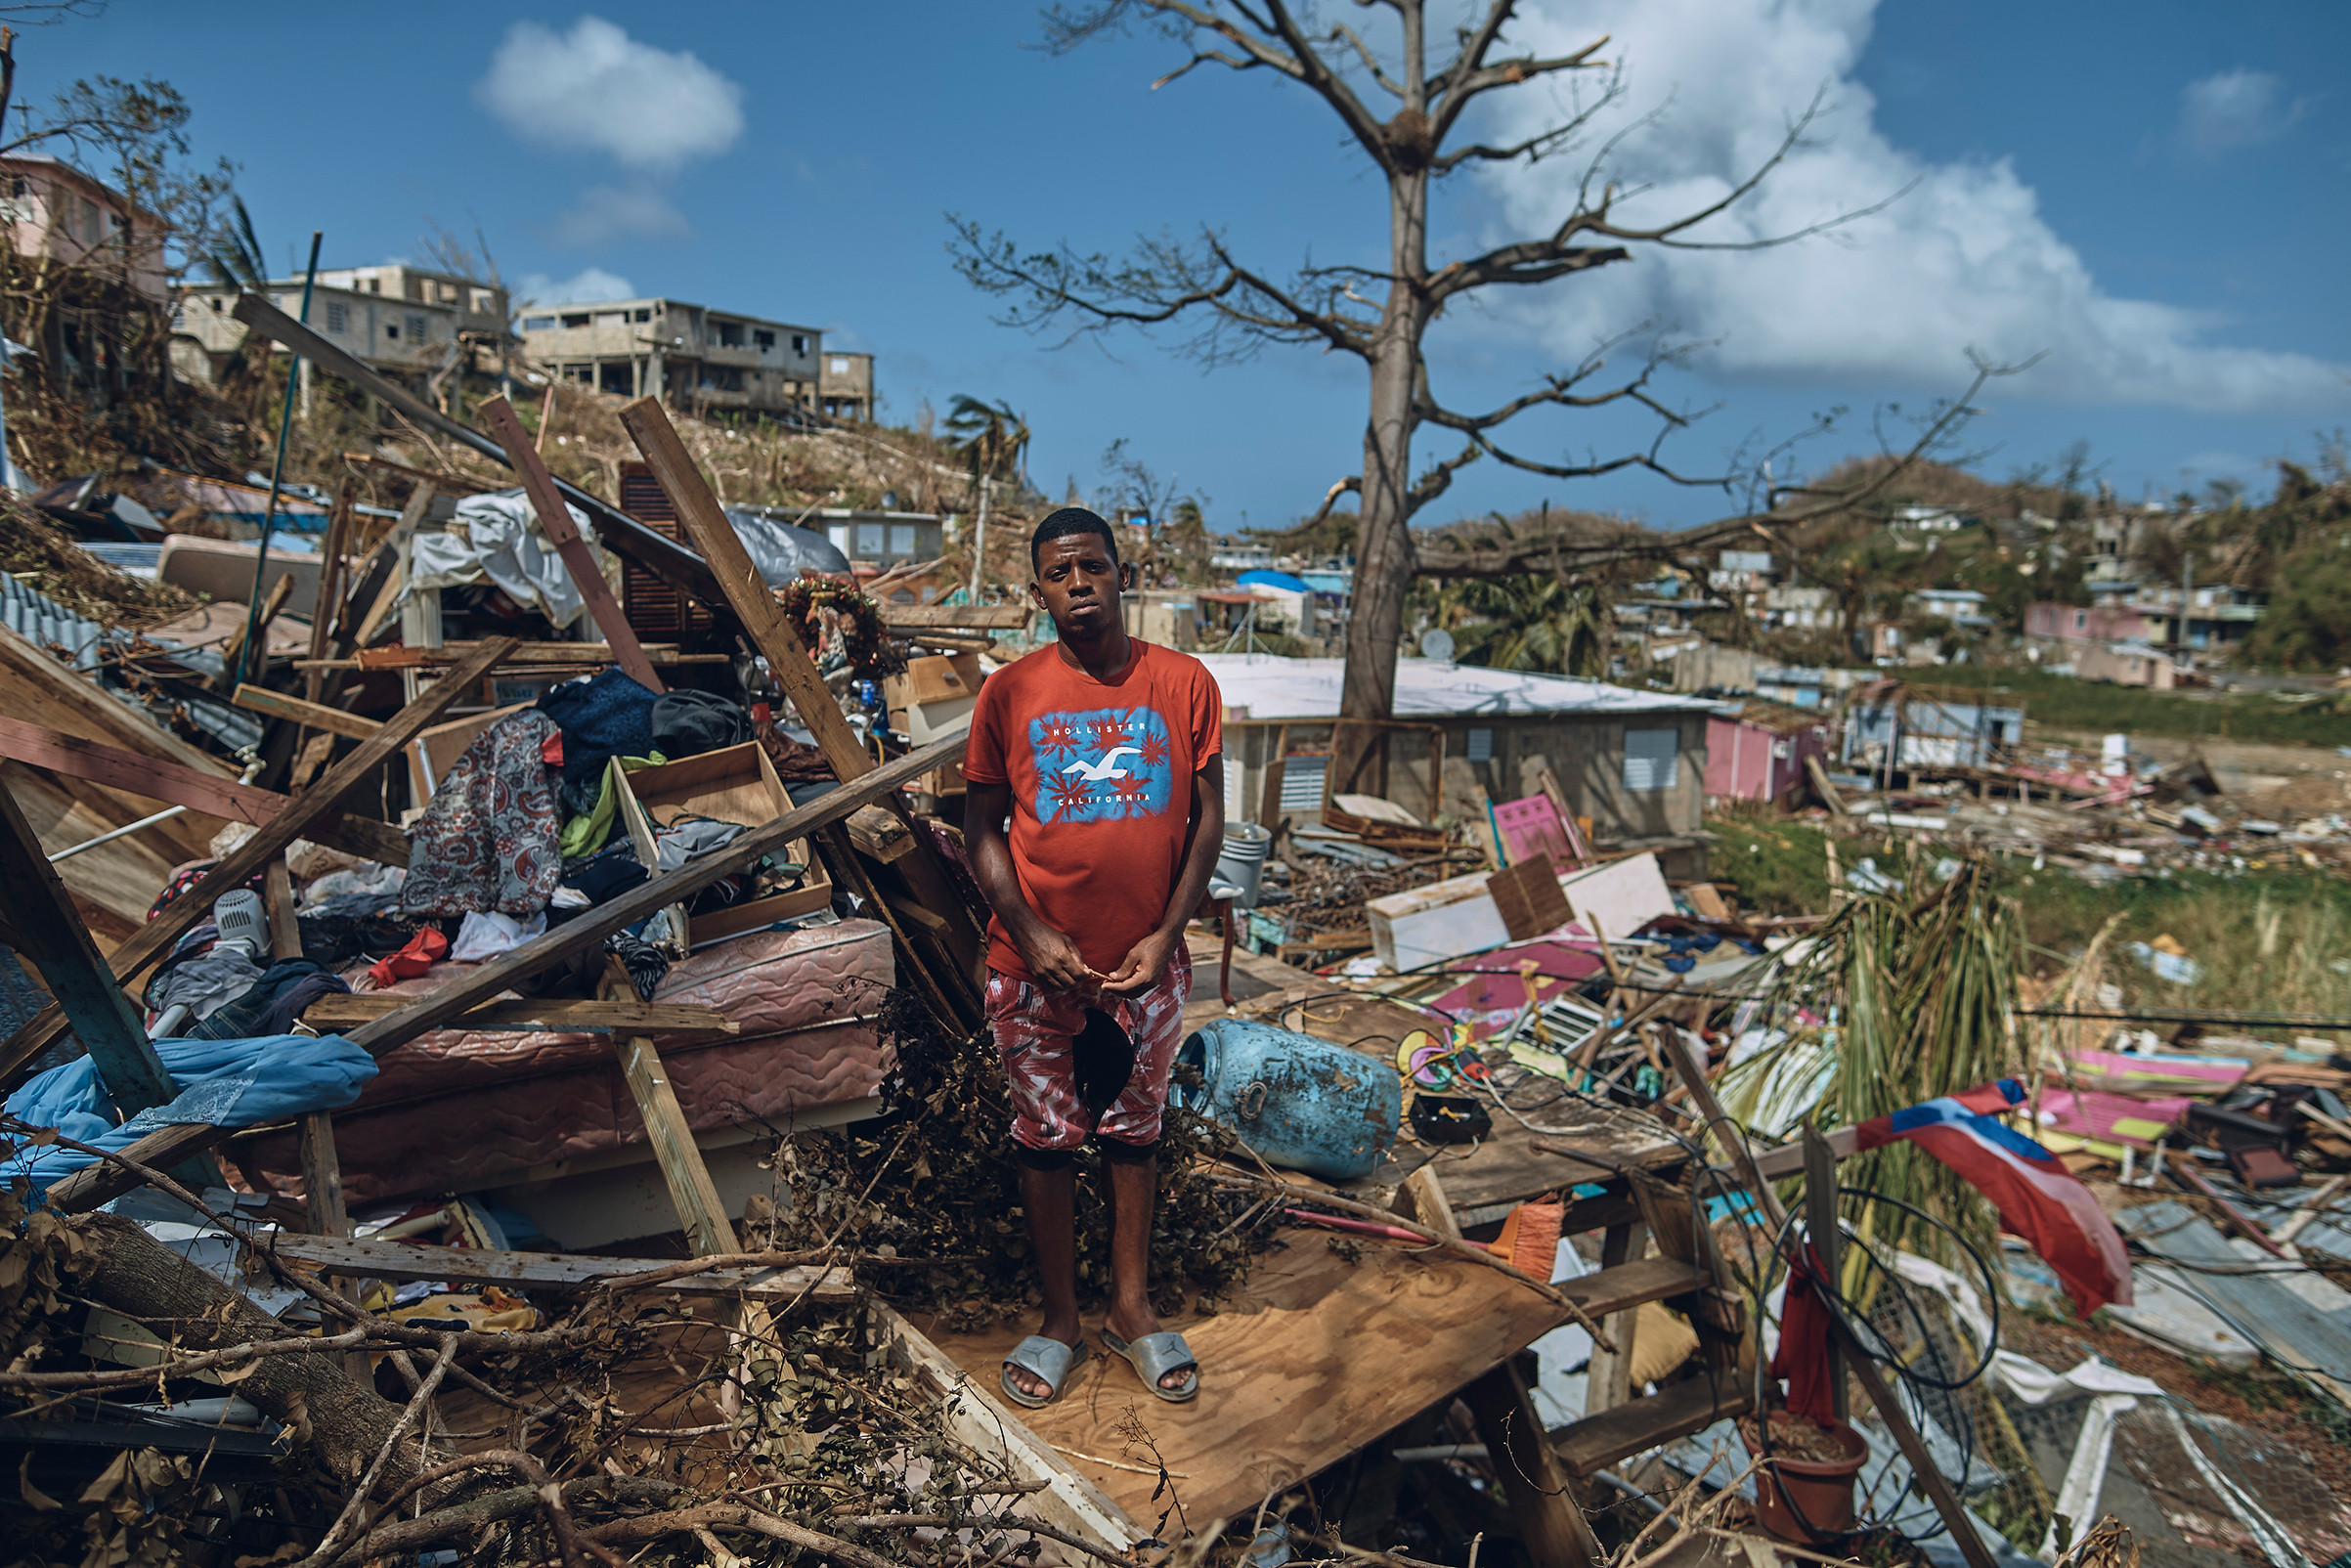 A man who has lived in San Isidro, outside the Puerto Rico capital since he was nine years old, stands for a portrait in his neighborhood, torn apart by Hurricane Maria, on Sept. 28, 2017. (Andres Kudacki for TIME)